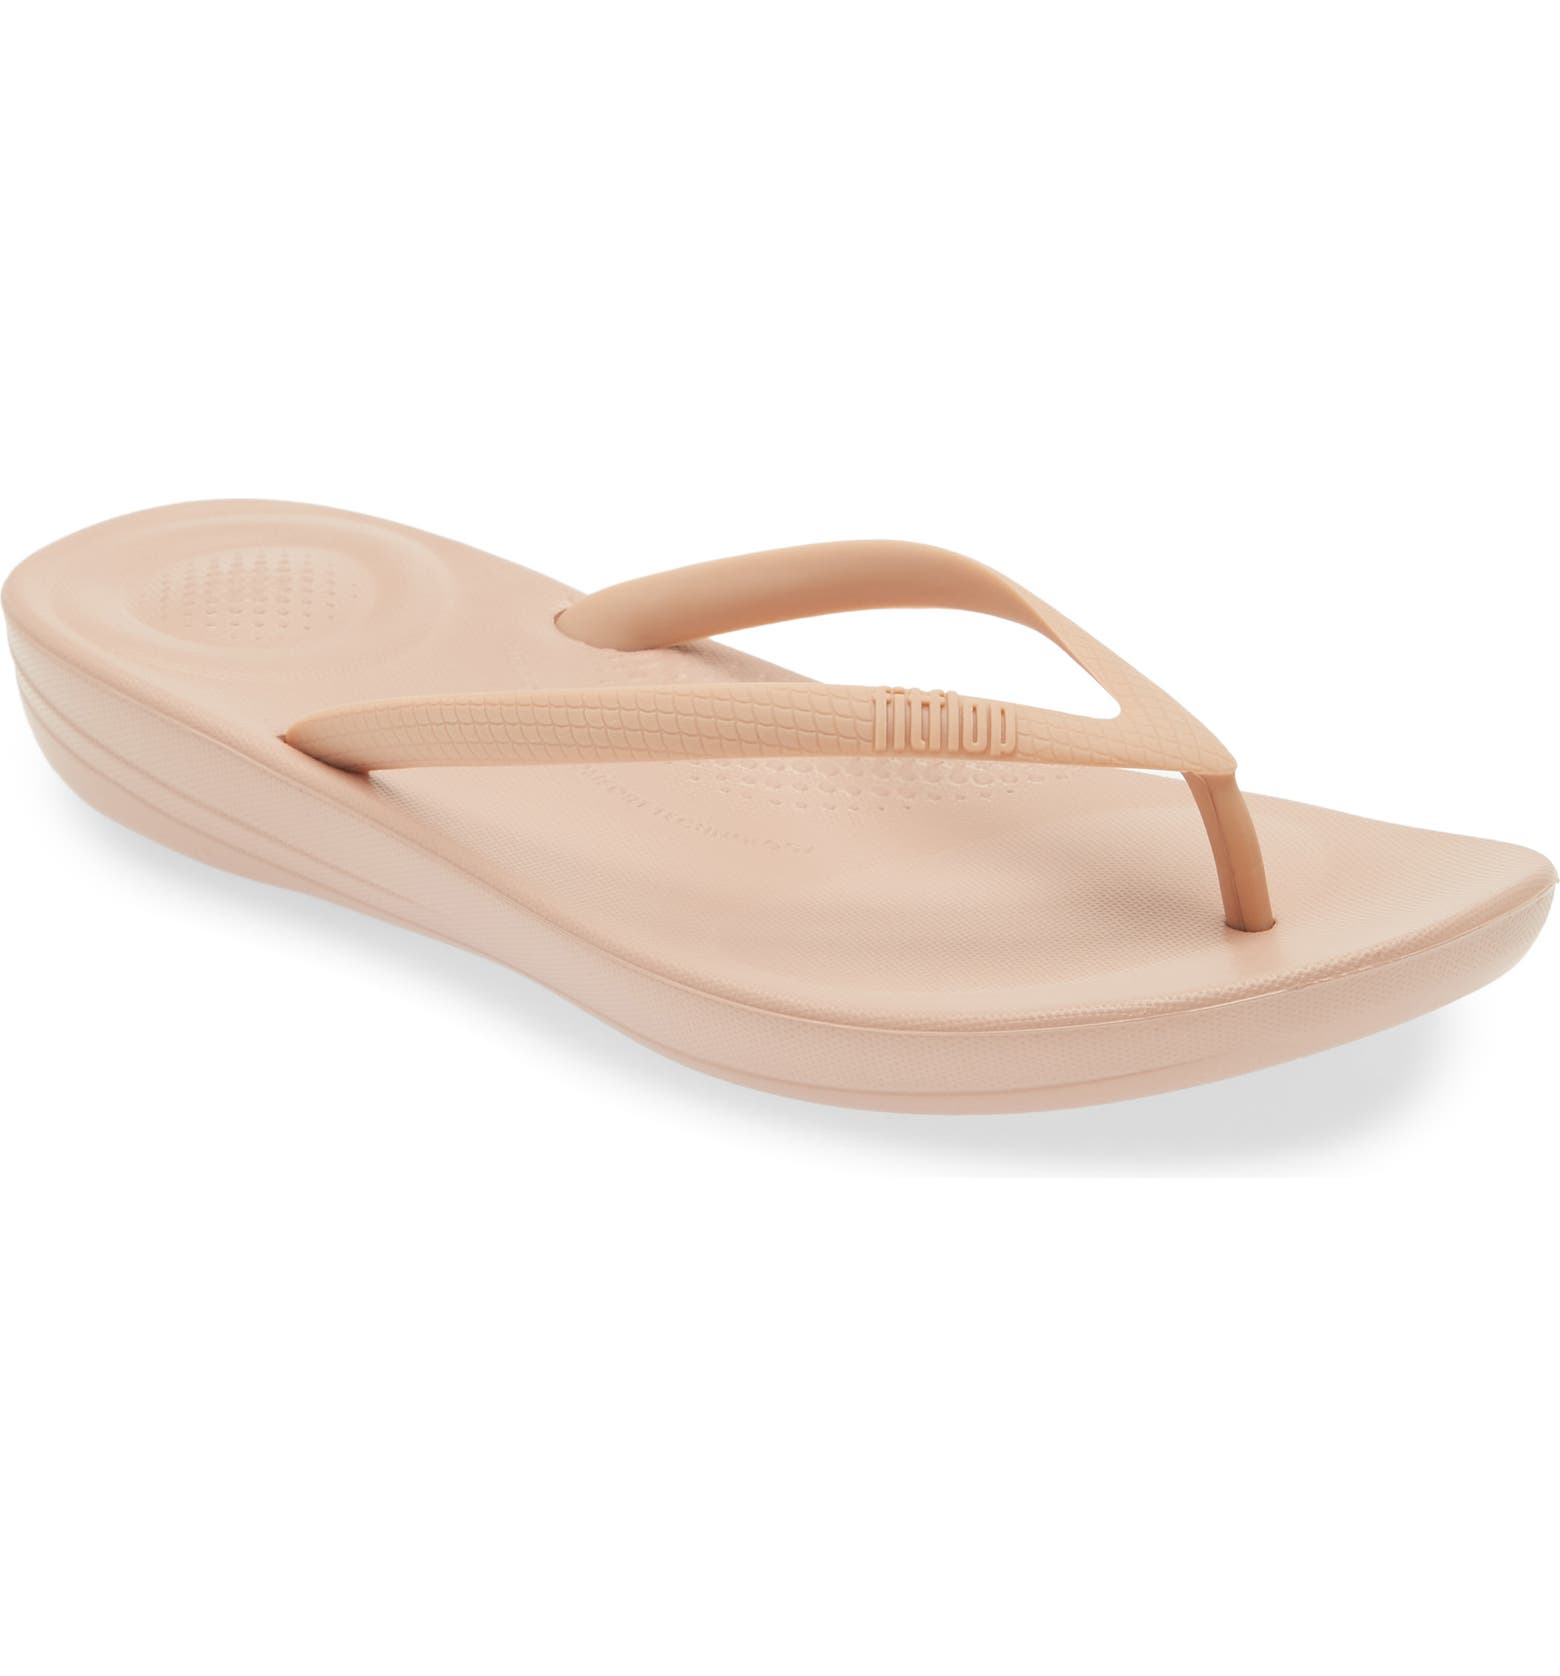 FitFlop iQushion Flip Flop | Nordstrom